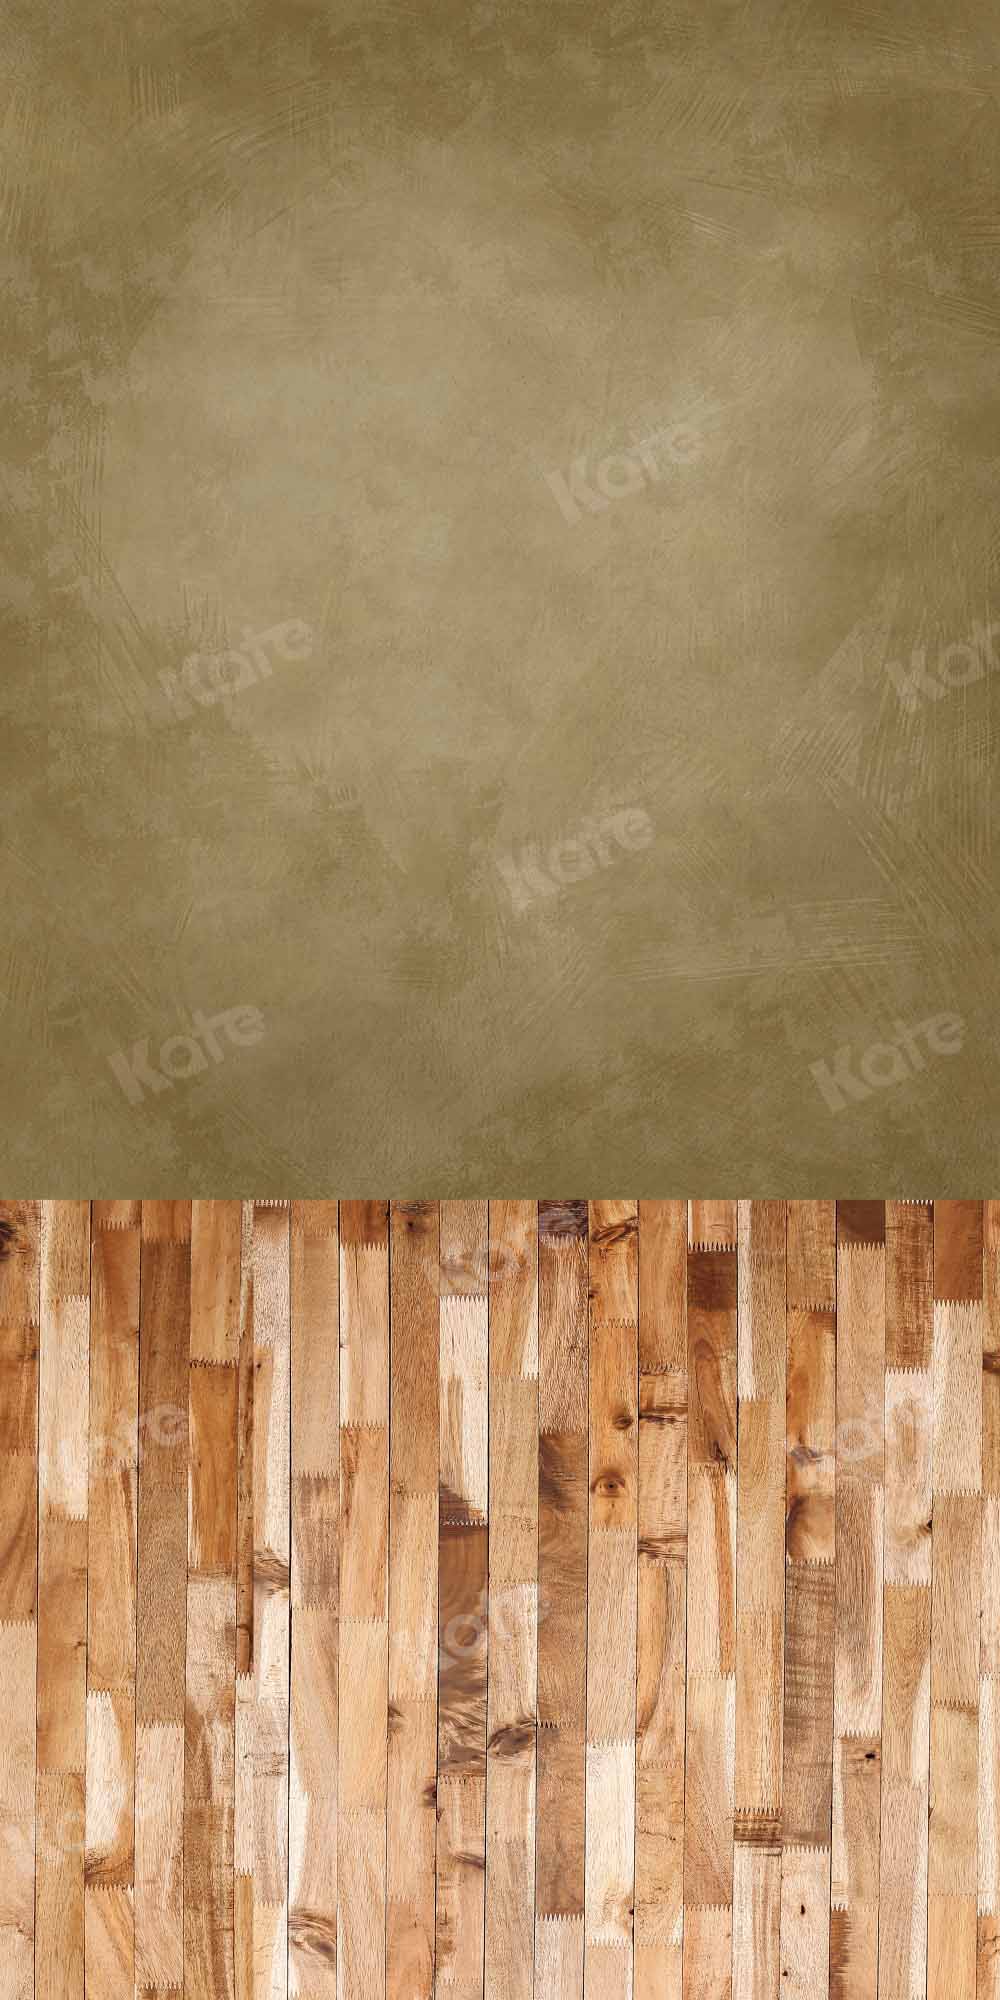 Kate Abstract Wooden Board Backdrop Stitching Designed by Chain Photography